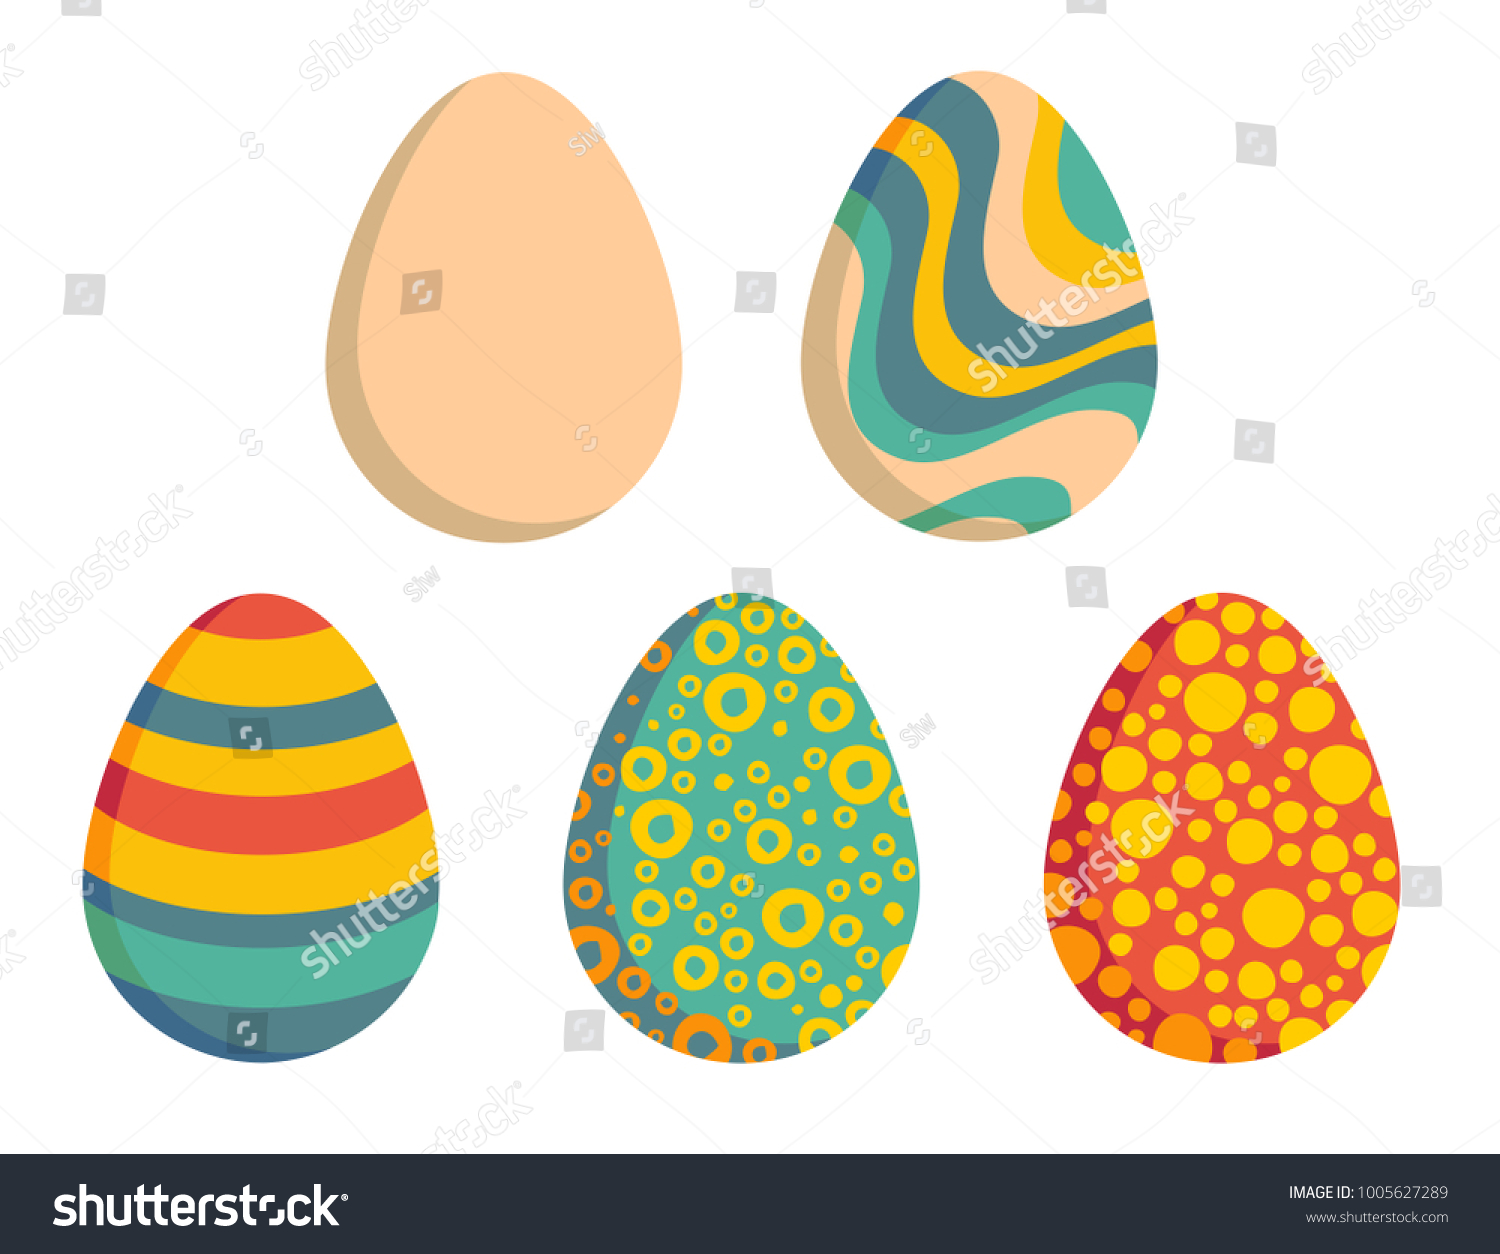 Five Easter eggs, one clear and four colored with strips, dots, rings and waves. Each isolated, so you can choose only one.  #1005627289